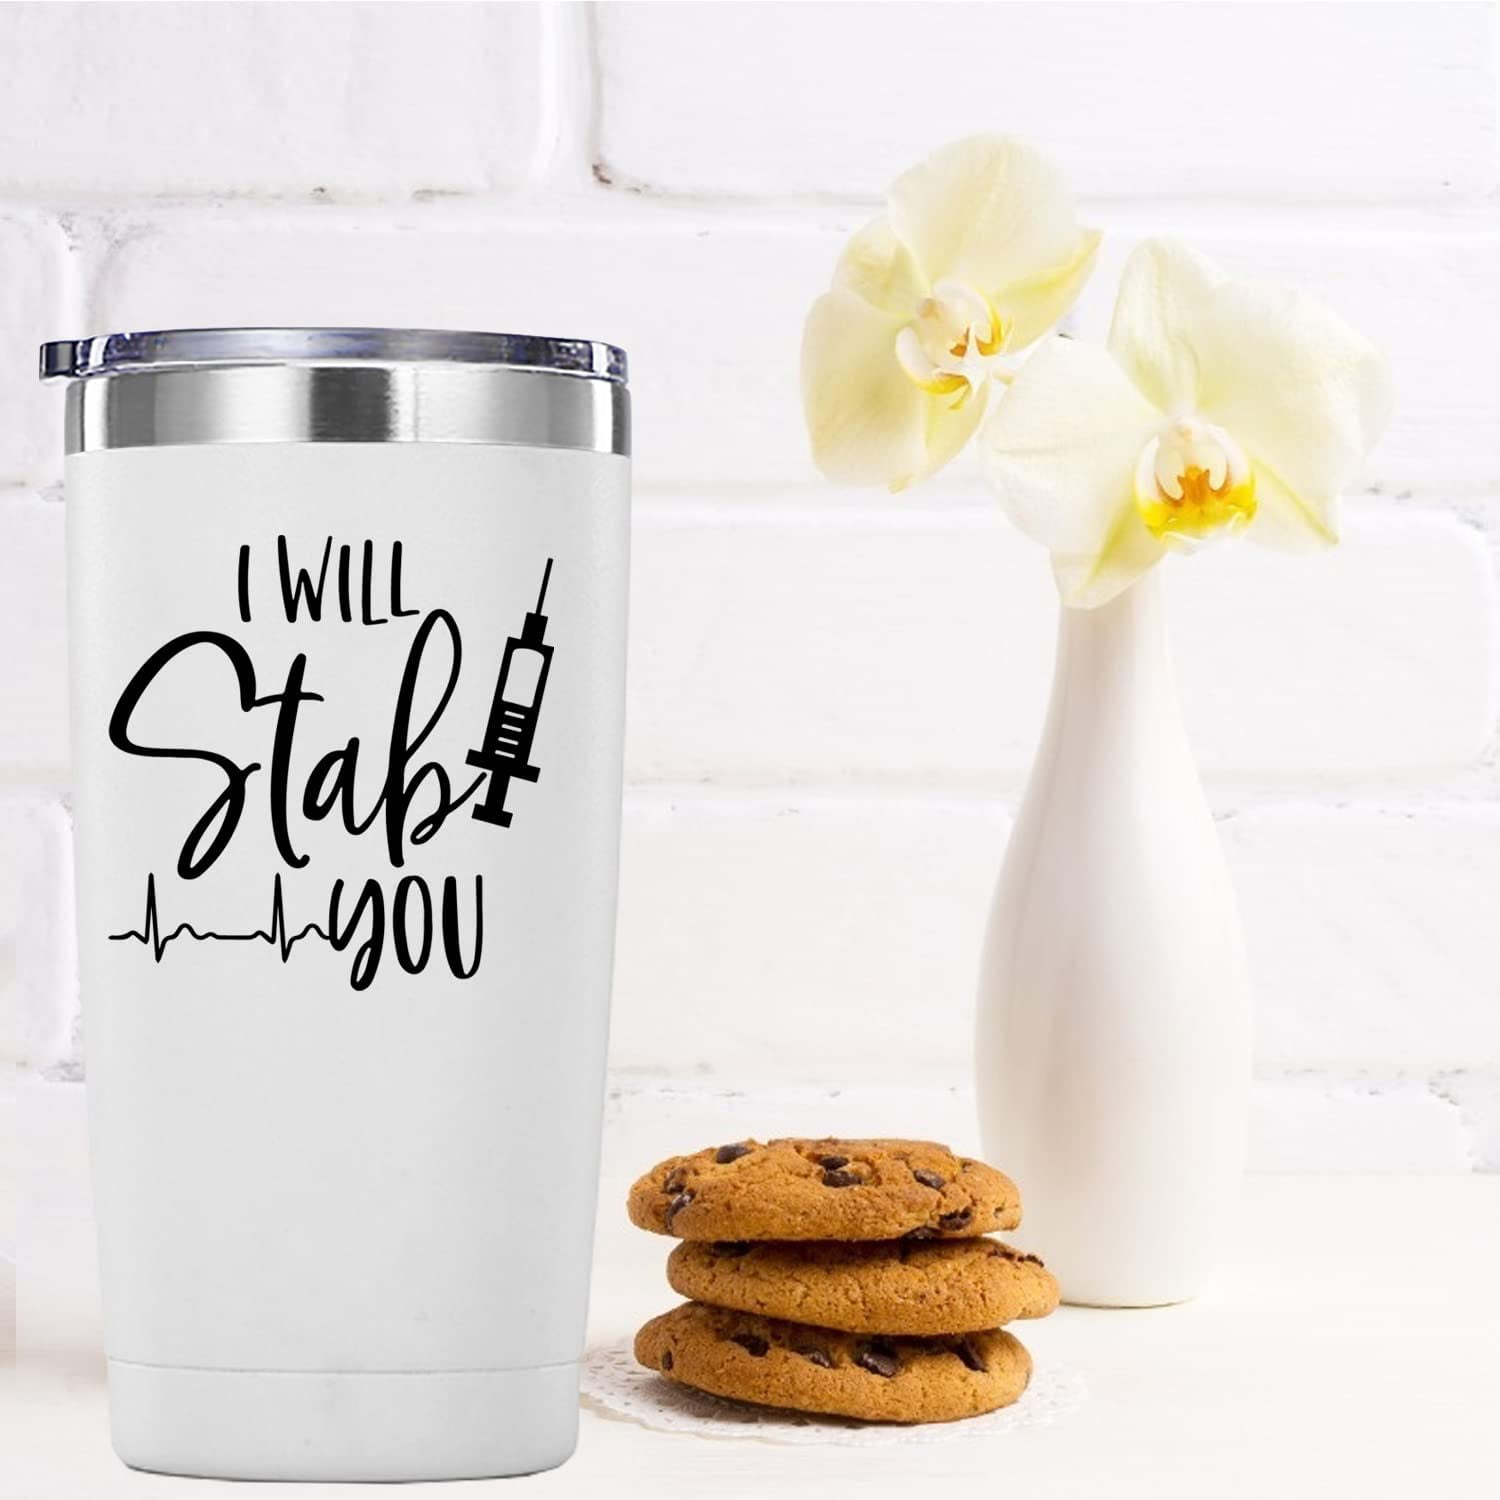 Nurse Travel Mug, Nurse Gifts Under 20 Dollars, Fun Inexpensive Gifts for  Coworkers Under 30 Dollars, Job Profession Gifts for Nurses 